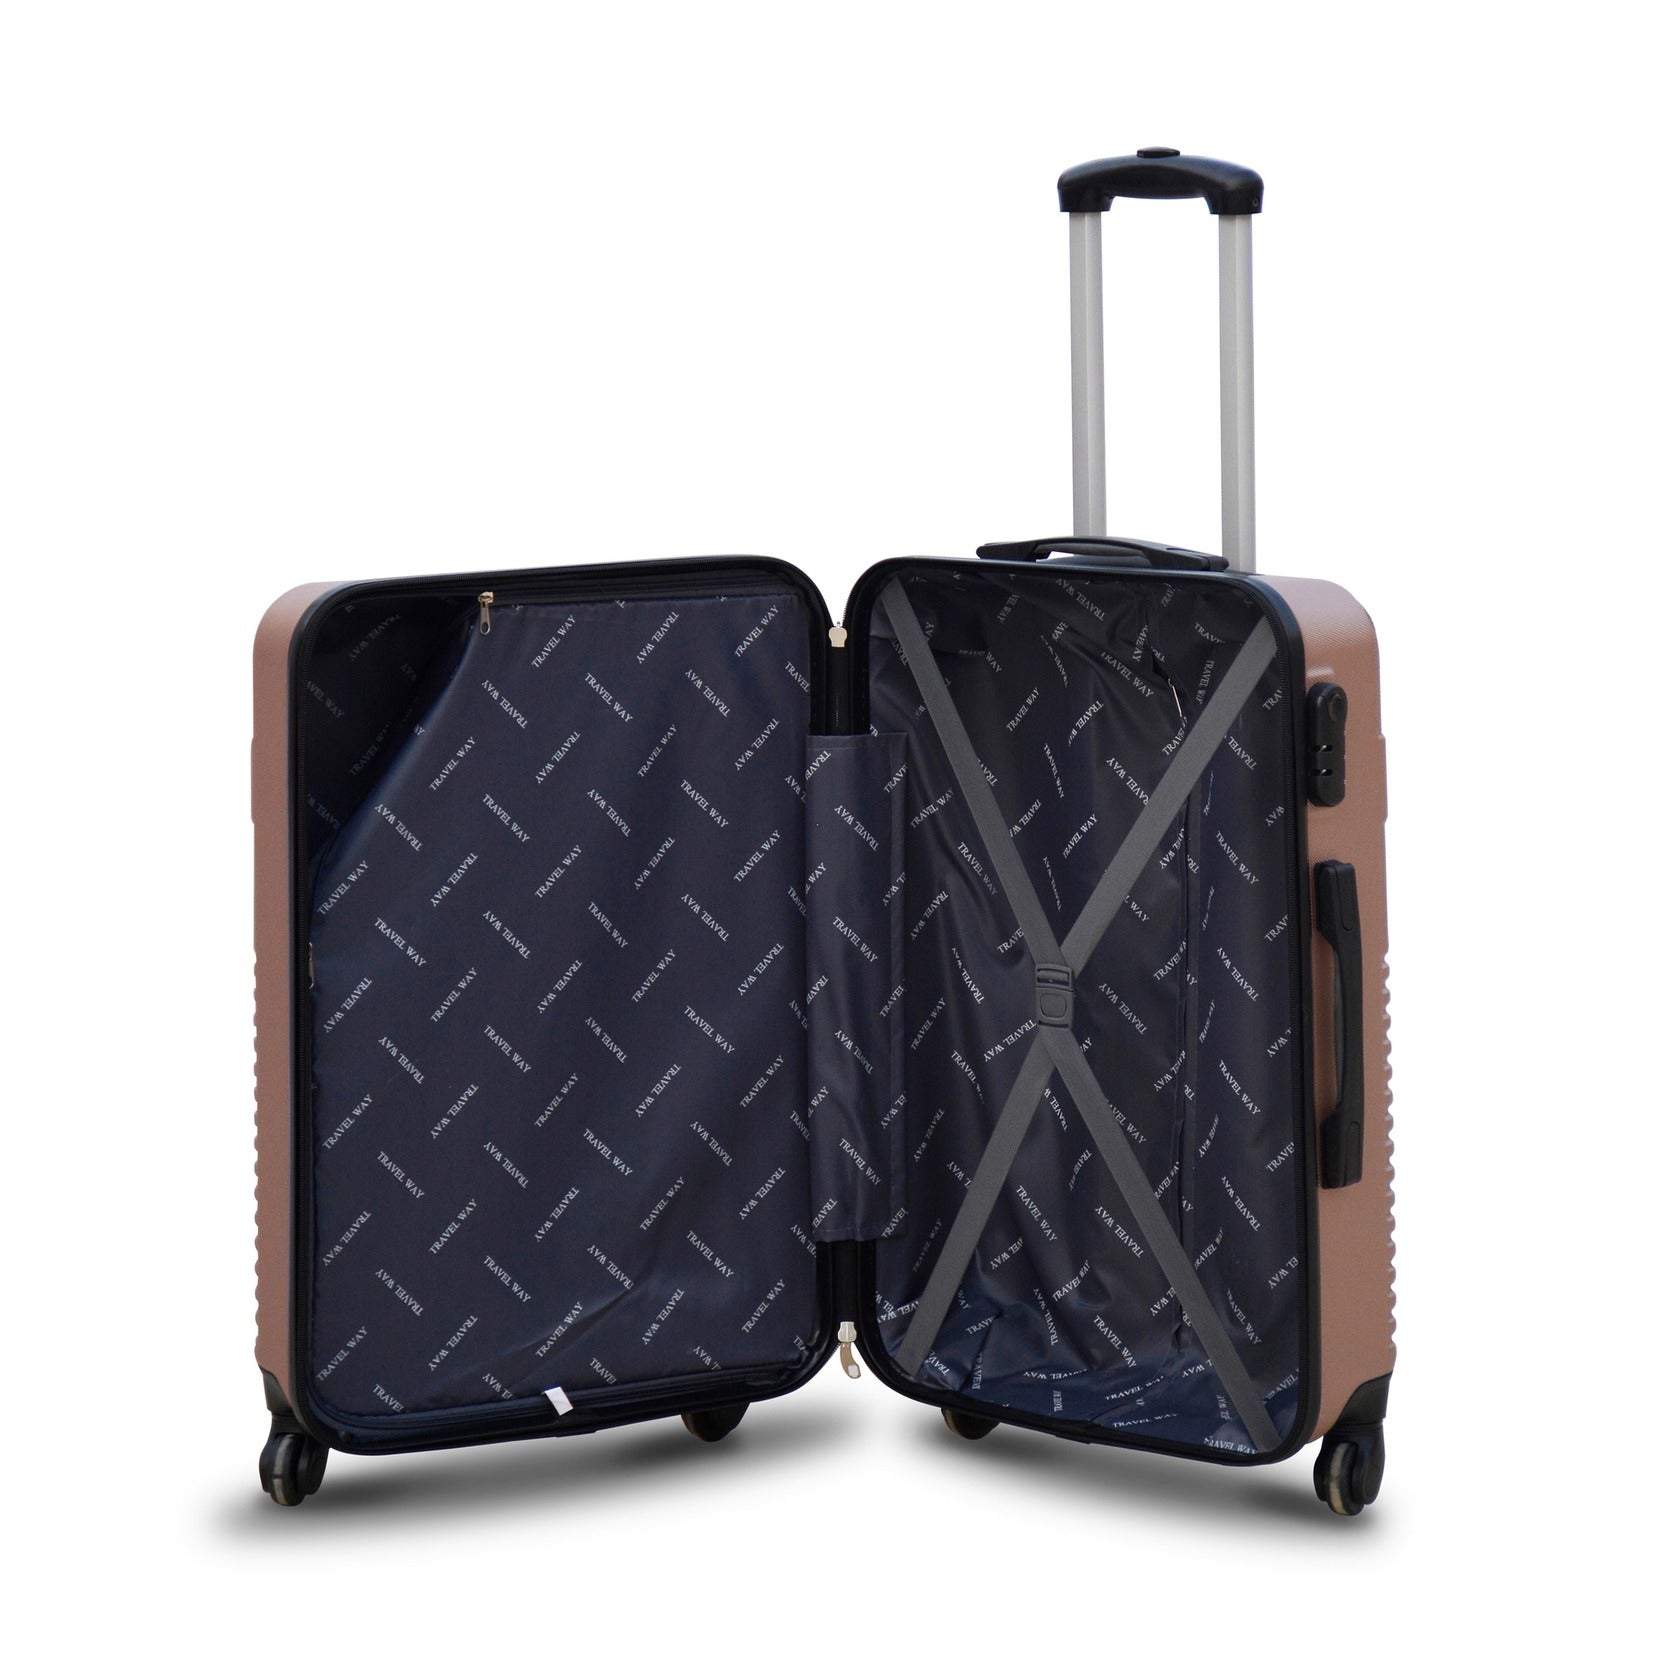 28" Zig Zag ABS Lightweight Luggage Bag with Double Spinner Wheel